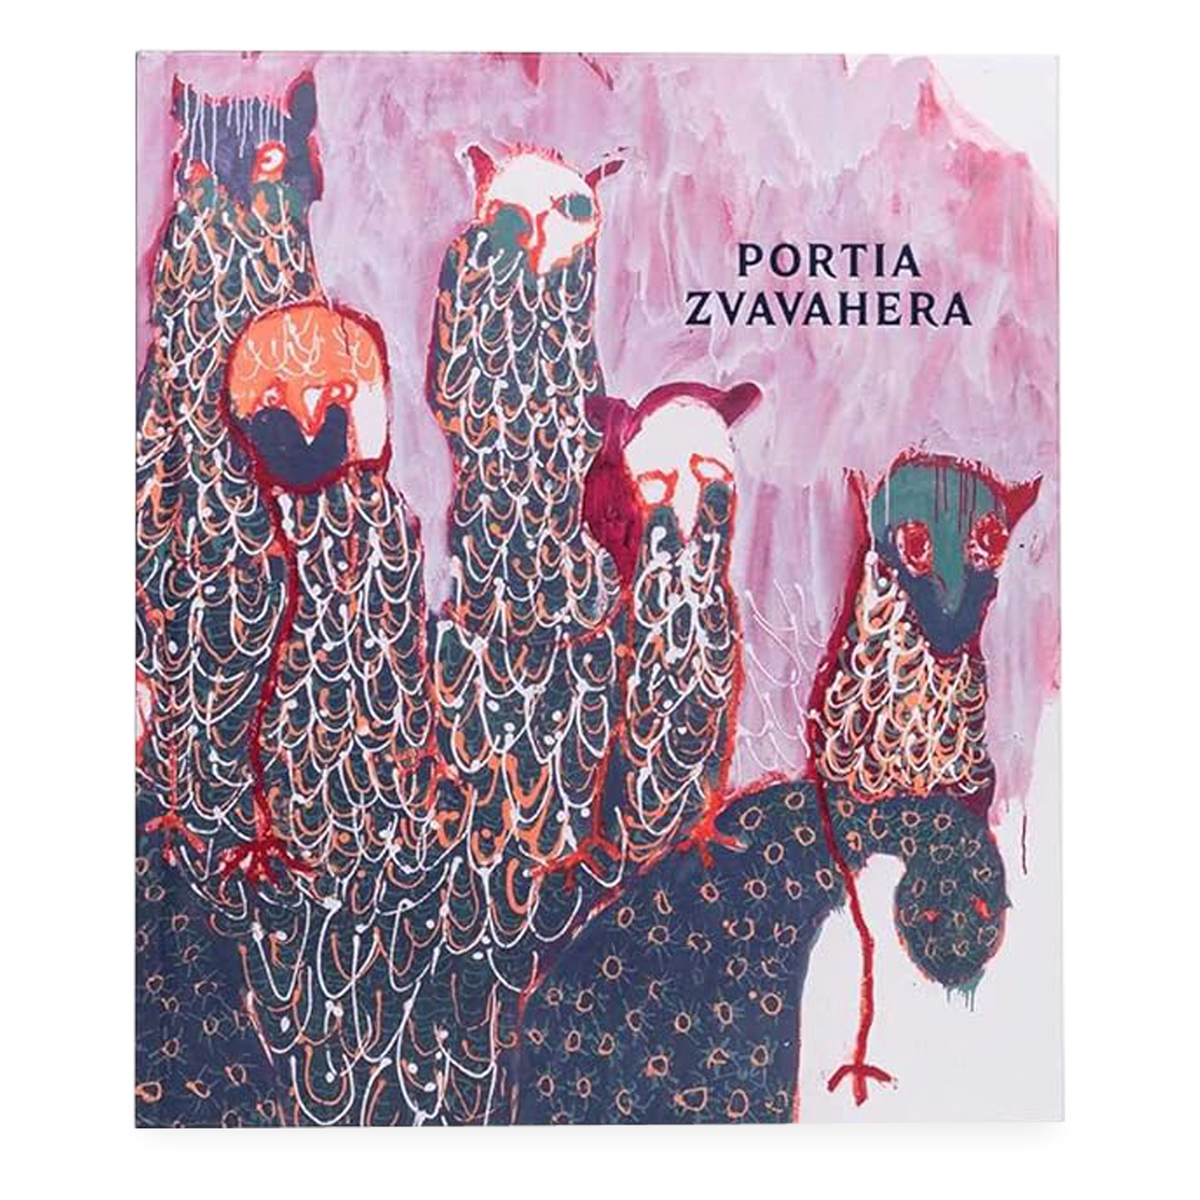 Expressive and rich paintings by the Zimbabwean artist Portia Zvavahera—made during a time of intense solitude and collective struggle across the globe.